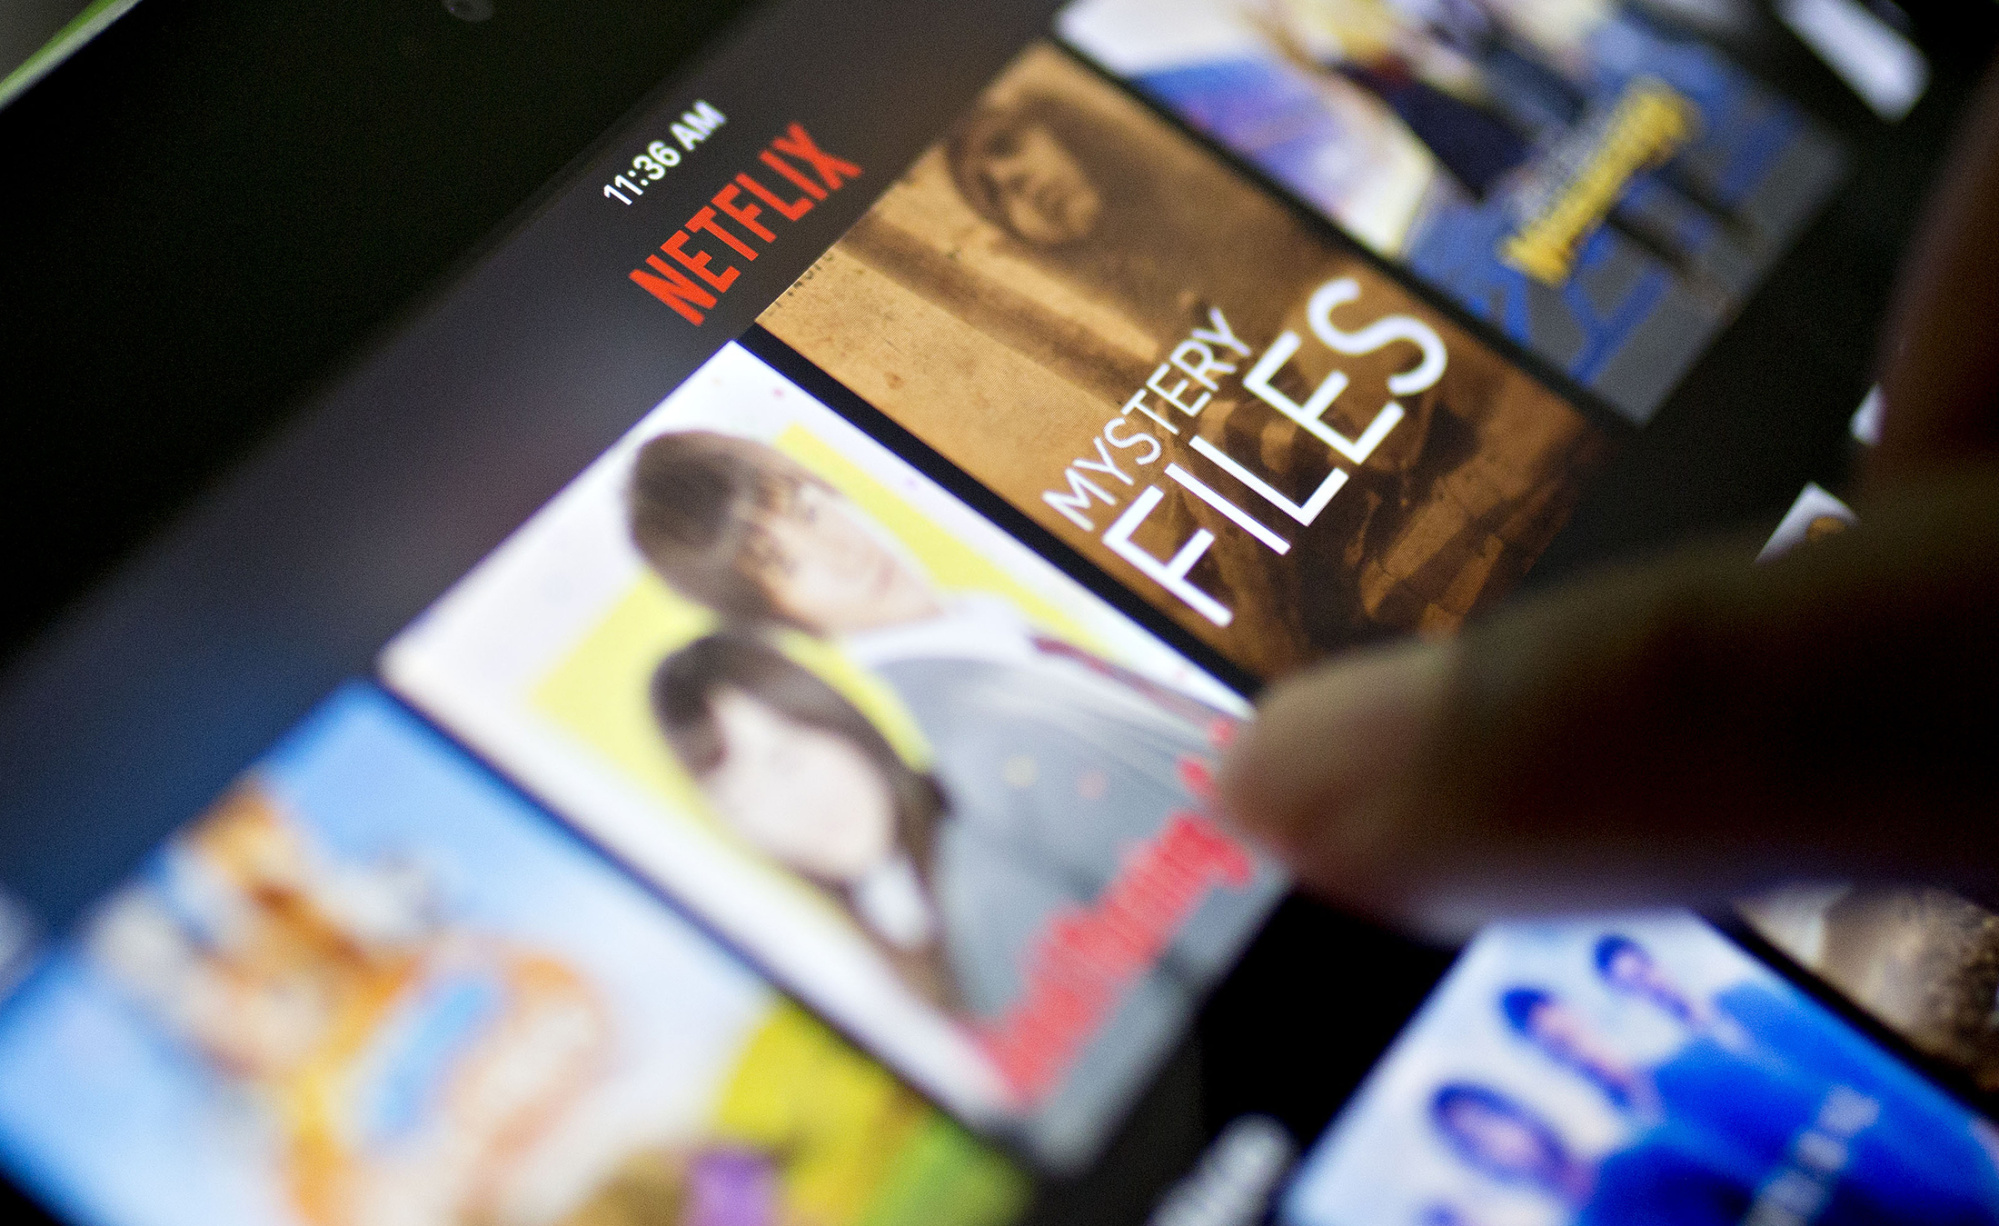 Netflix to launch 40+ new anime titles in 2021 - BroadcastPro ME